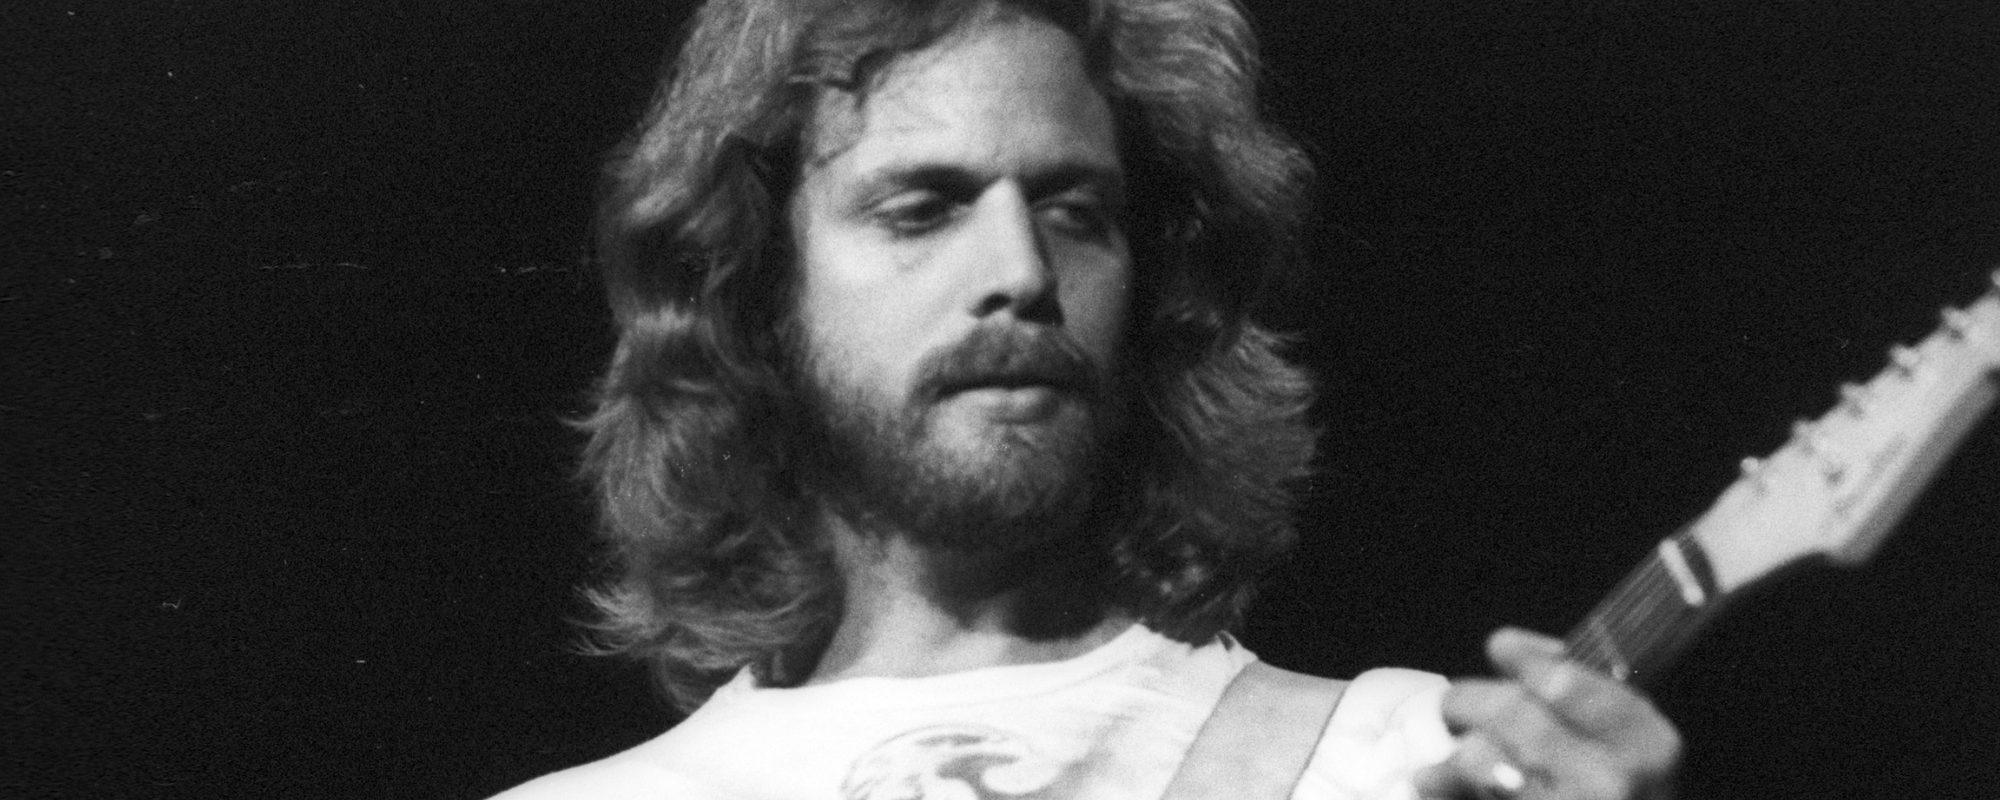 3 Eagles Hits That Highlight Don Felder’s Indelible Guitar Playing